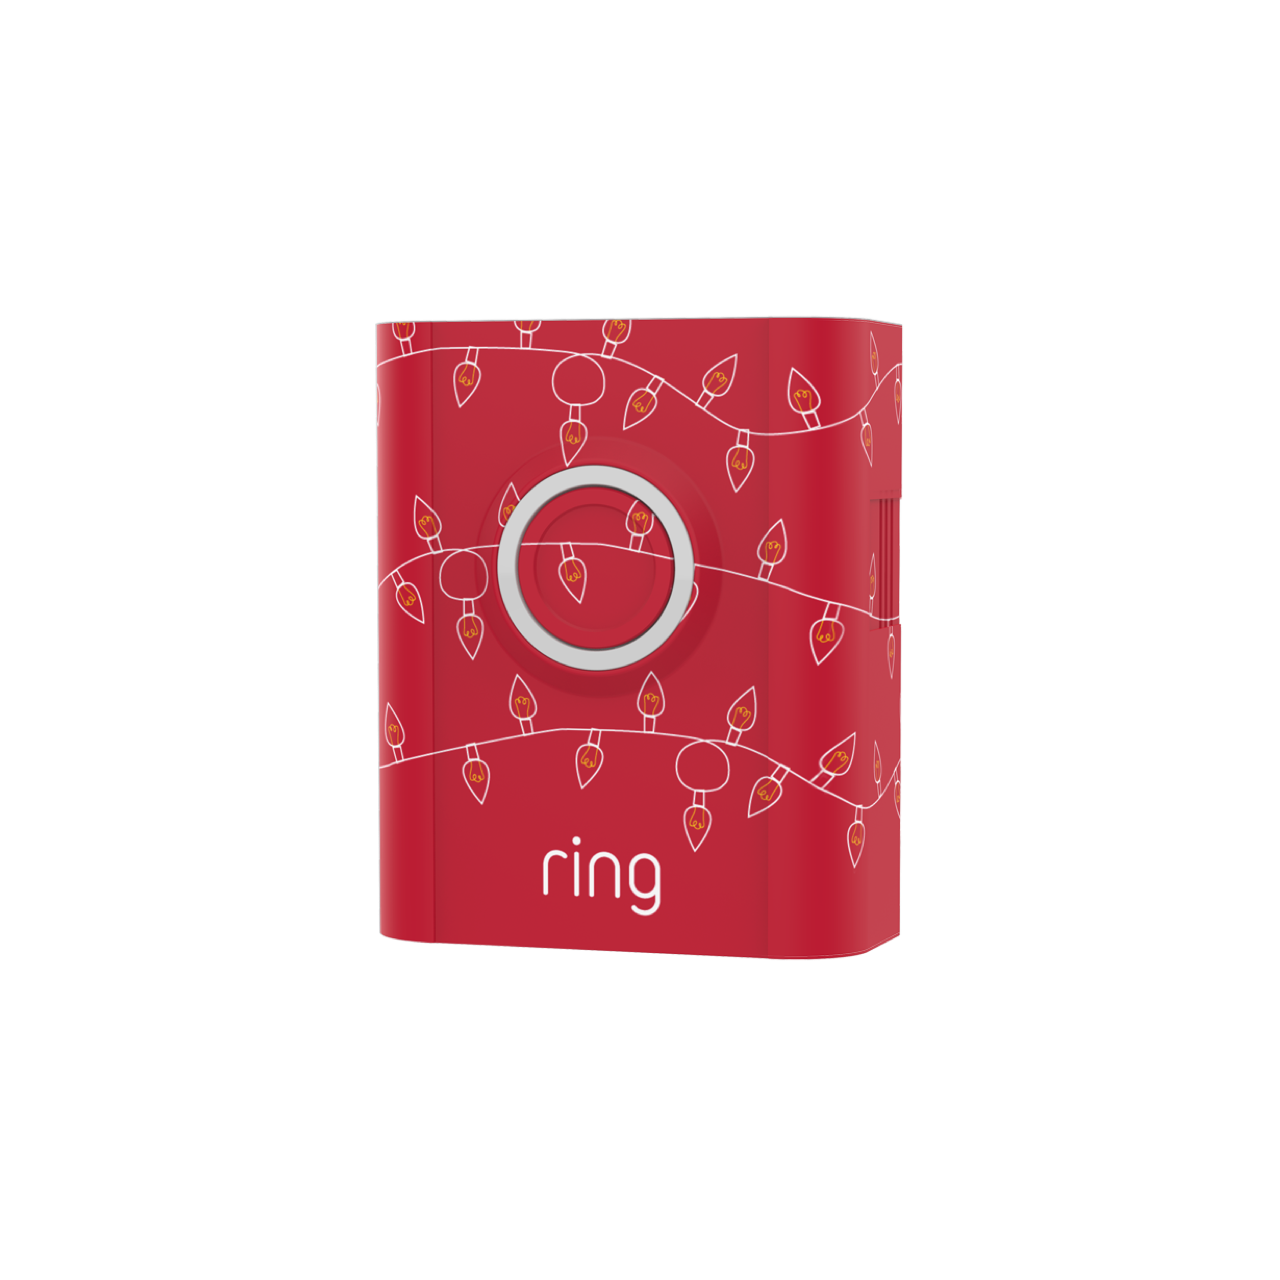 products/holidayfaceplate2021_red__1280x1280_8f4baf88-5e11-47b6-b3fe-6636ca683c6b.png